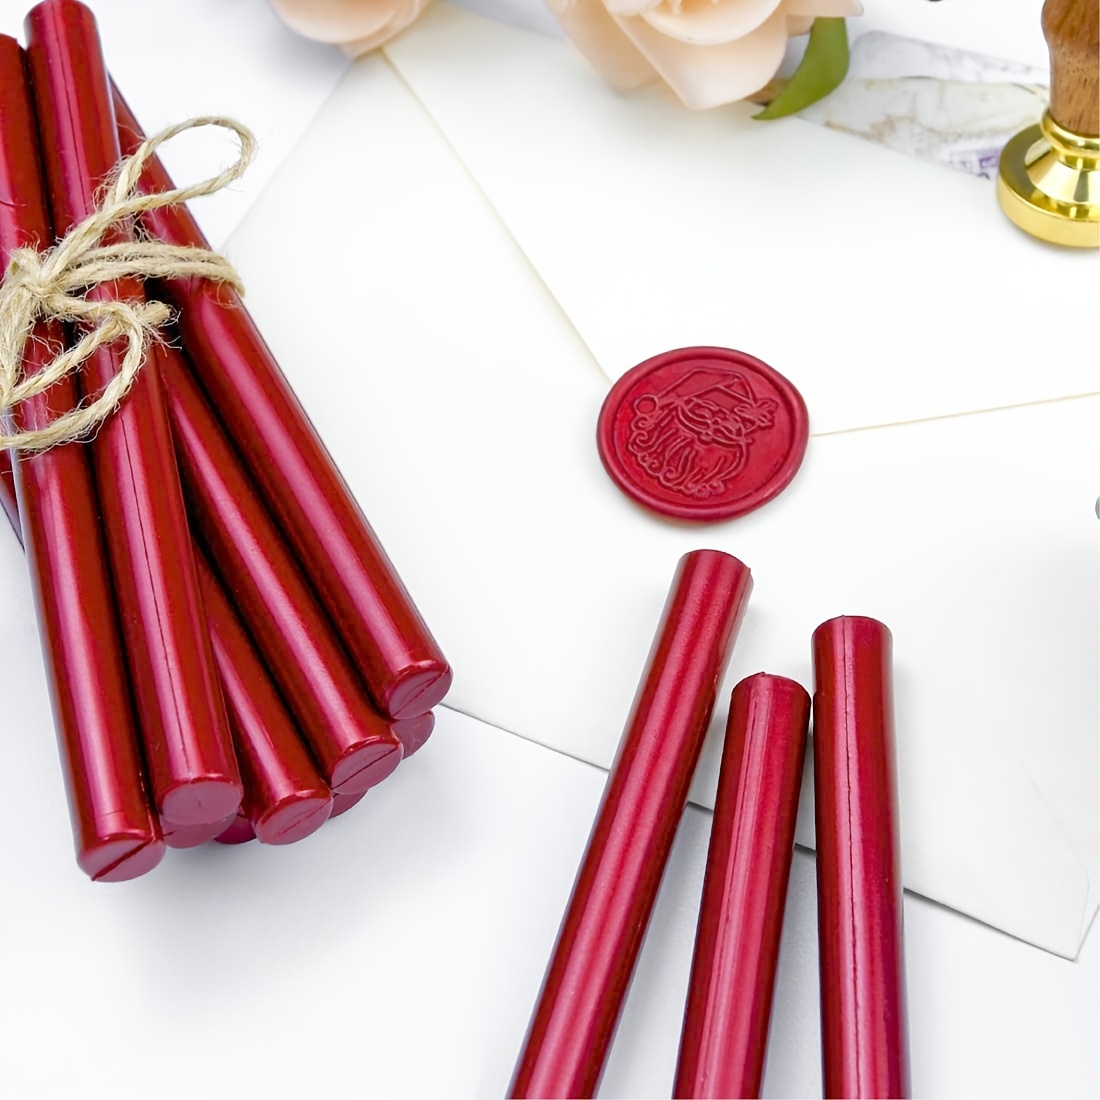  Cutecatwing 200pcs Metallic Burgundy Sealing Wax Beads Wine Red  Octagon Wax Seal Bead for Sealing Stamp Wedding Invitations Cards Letter  Envelopes Wine Packages : Arts, Crafts & Sewing